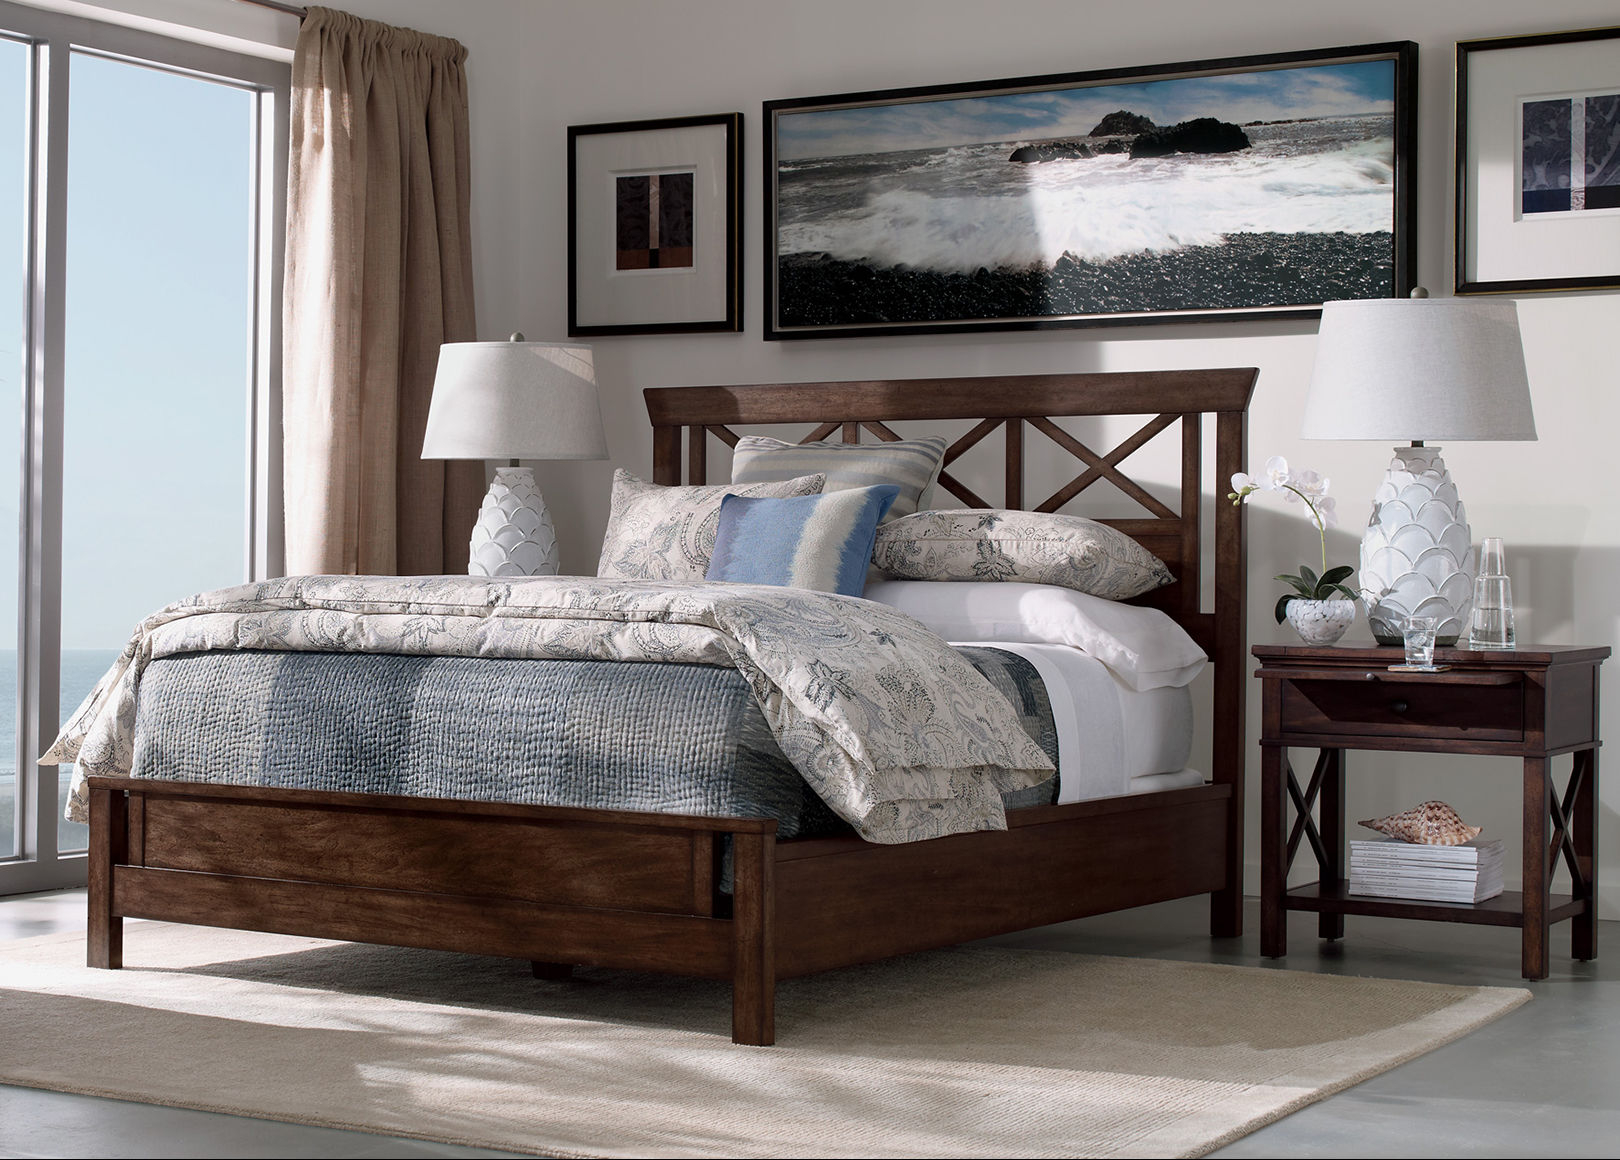 Ethan Allen Bedroom Collection Any Room Show Gopher Tips in dimensions 1620 X 1160